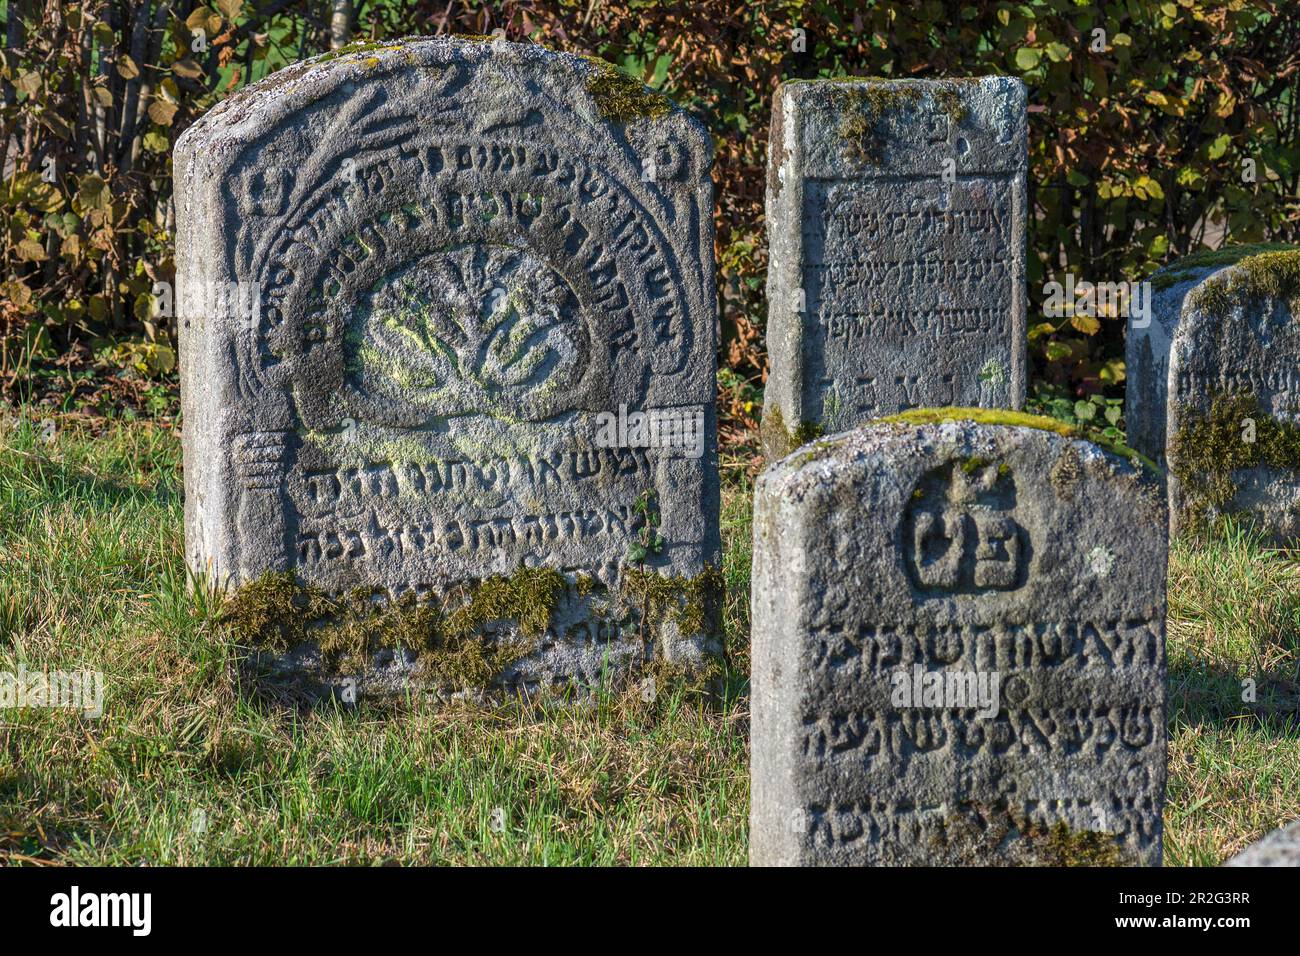 Jewish gravestones with symbols, historical Jewish cemetery, this burial place was occupied from 1737 to 1934, Hagenbach, Upper Franconia, Bavaria Stock Photo